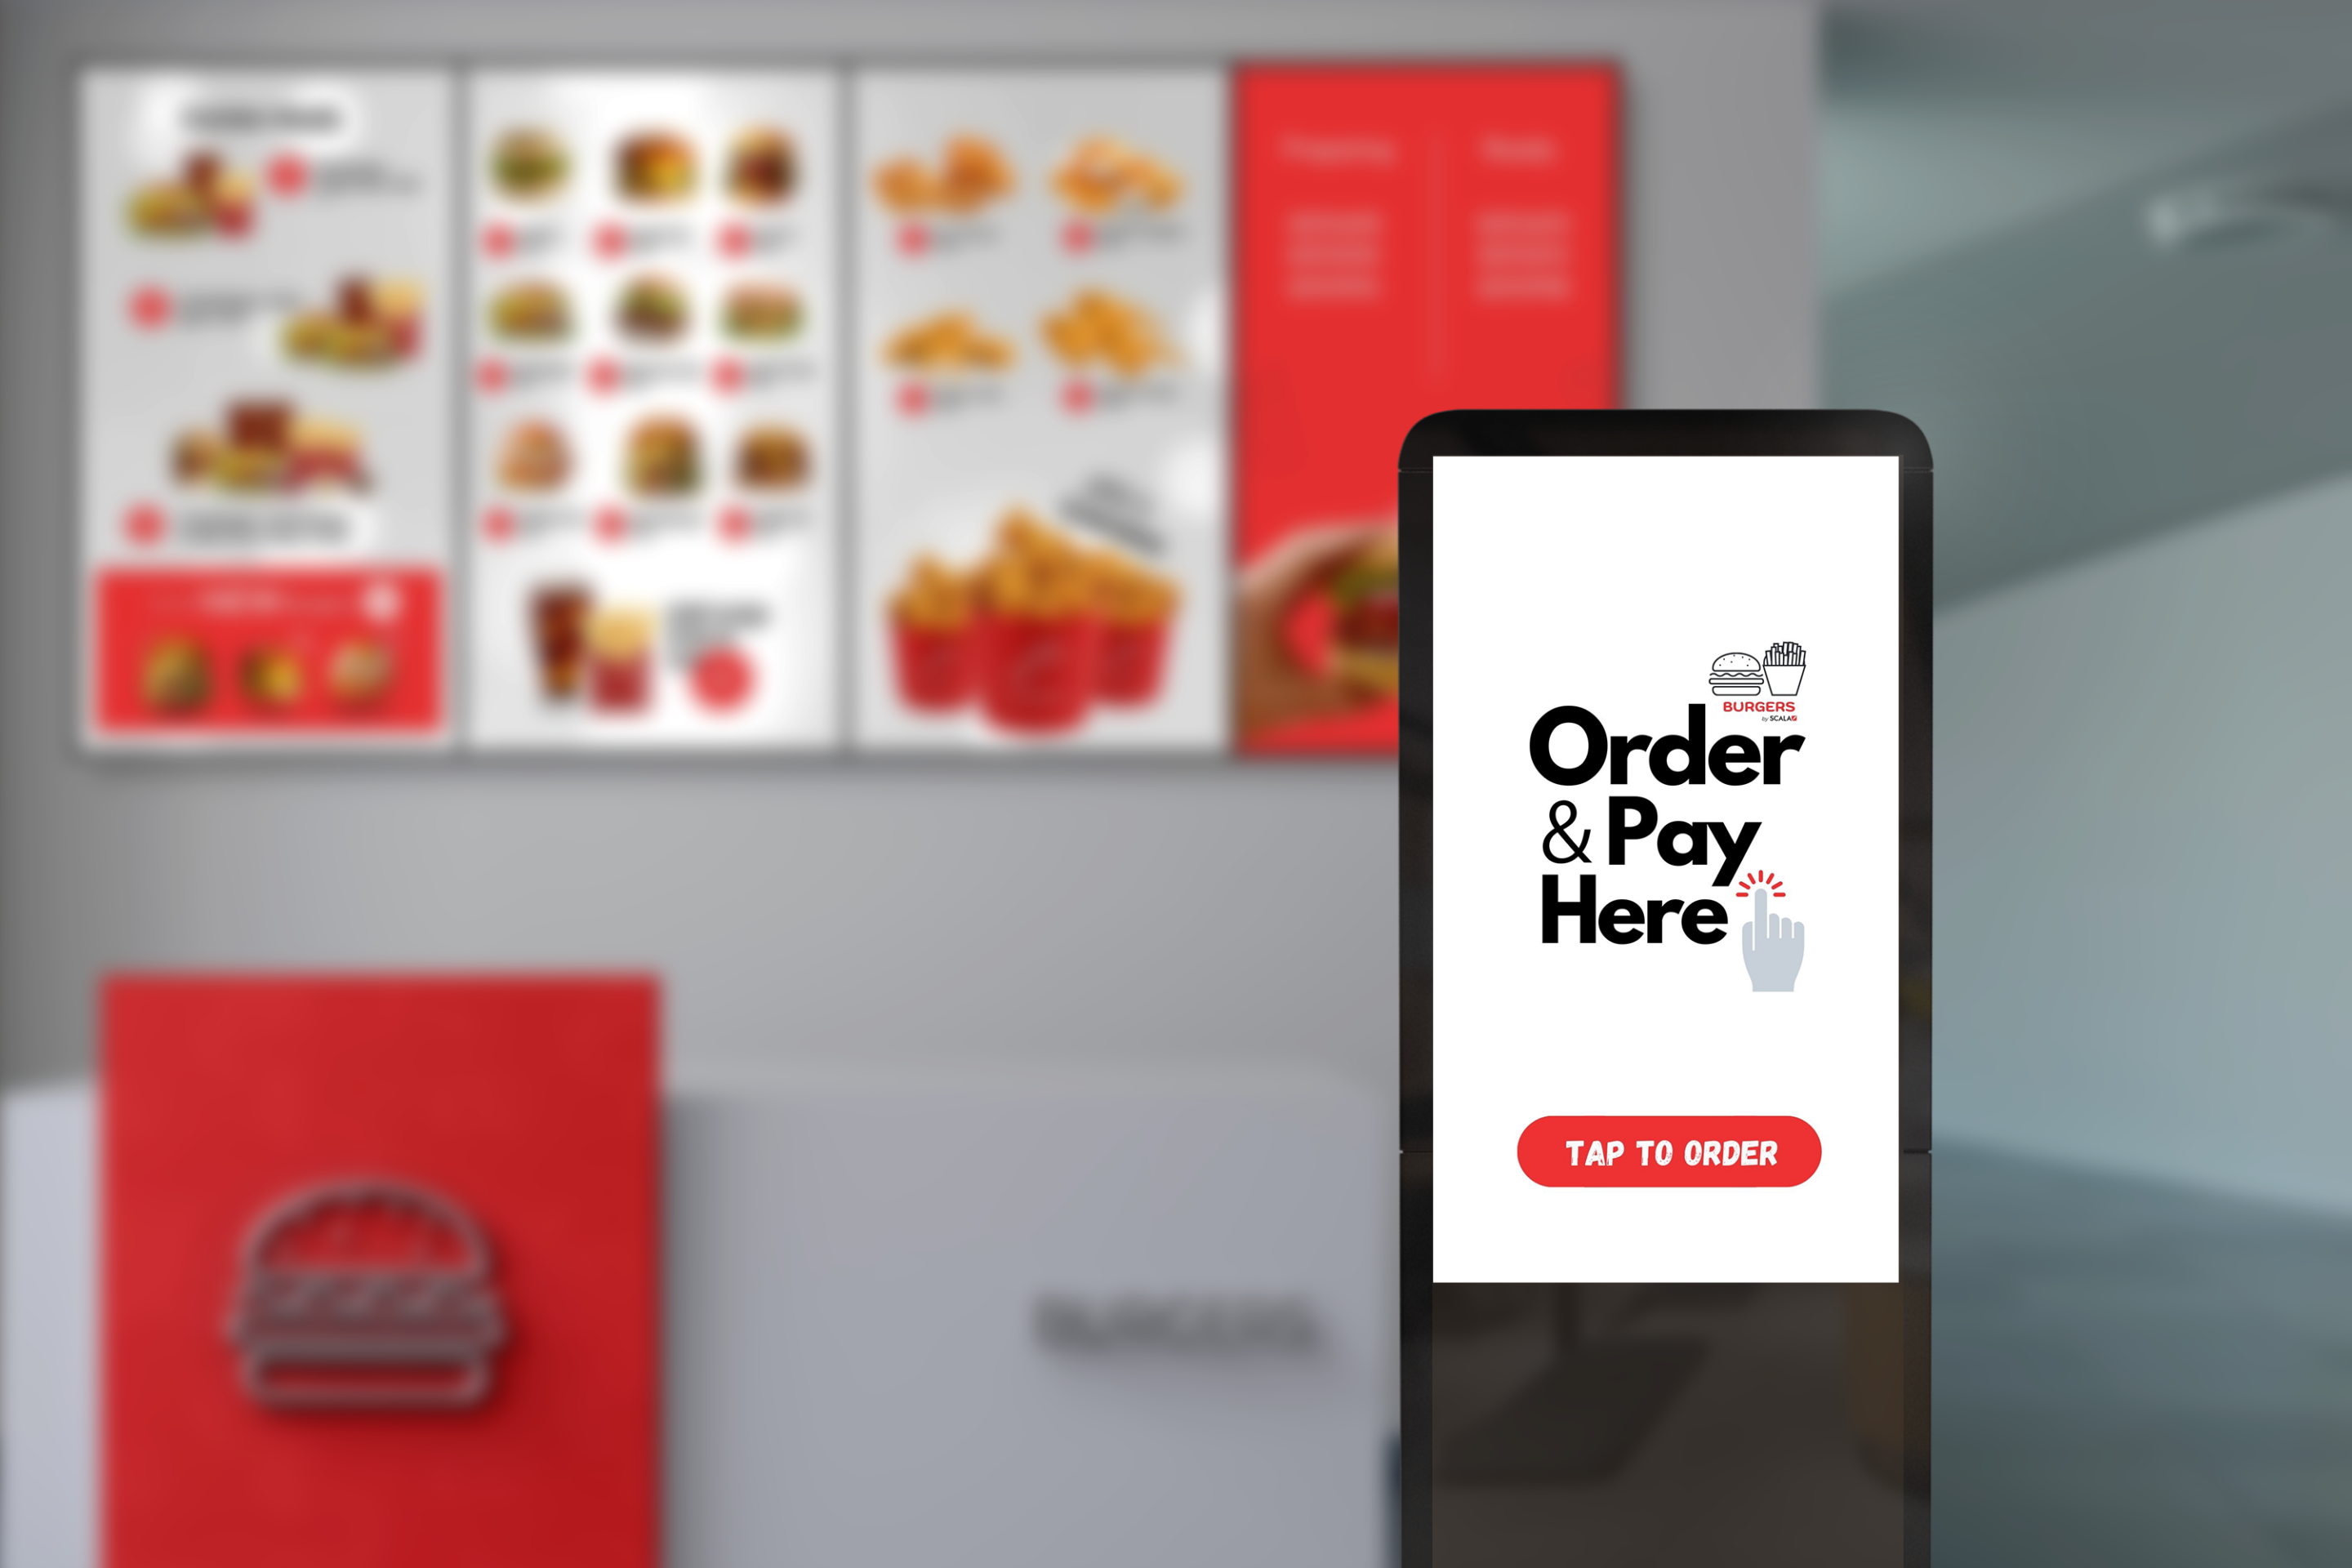 Self-ordering kiosks for QSRs and cafes